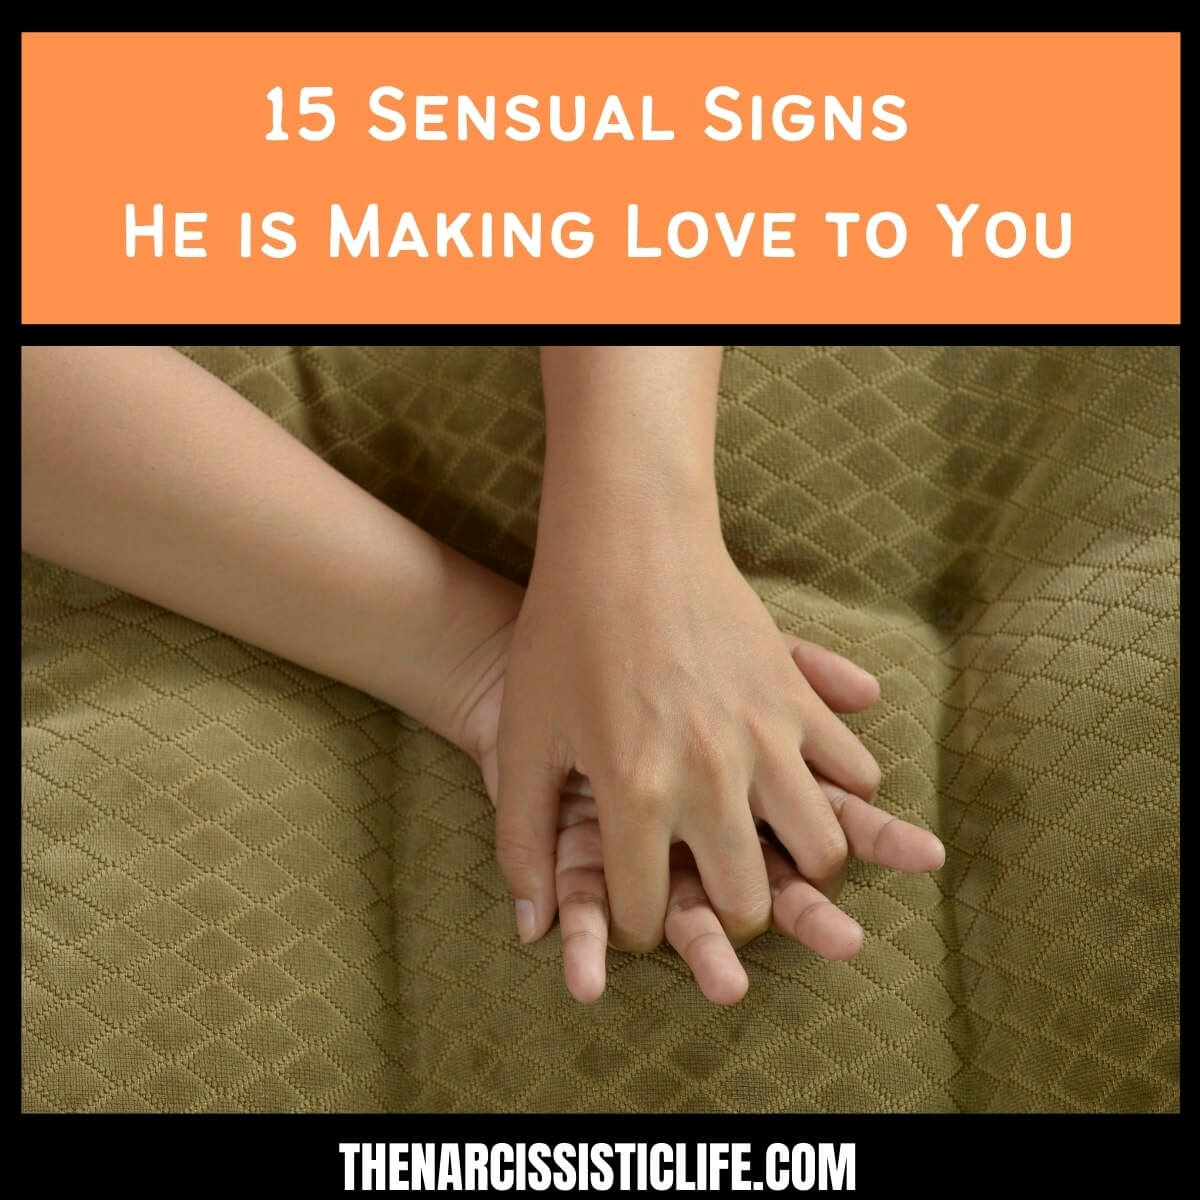 15 Sensual Signs He is Making Love to You